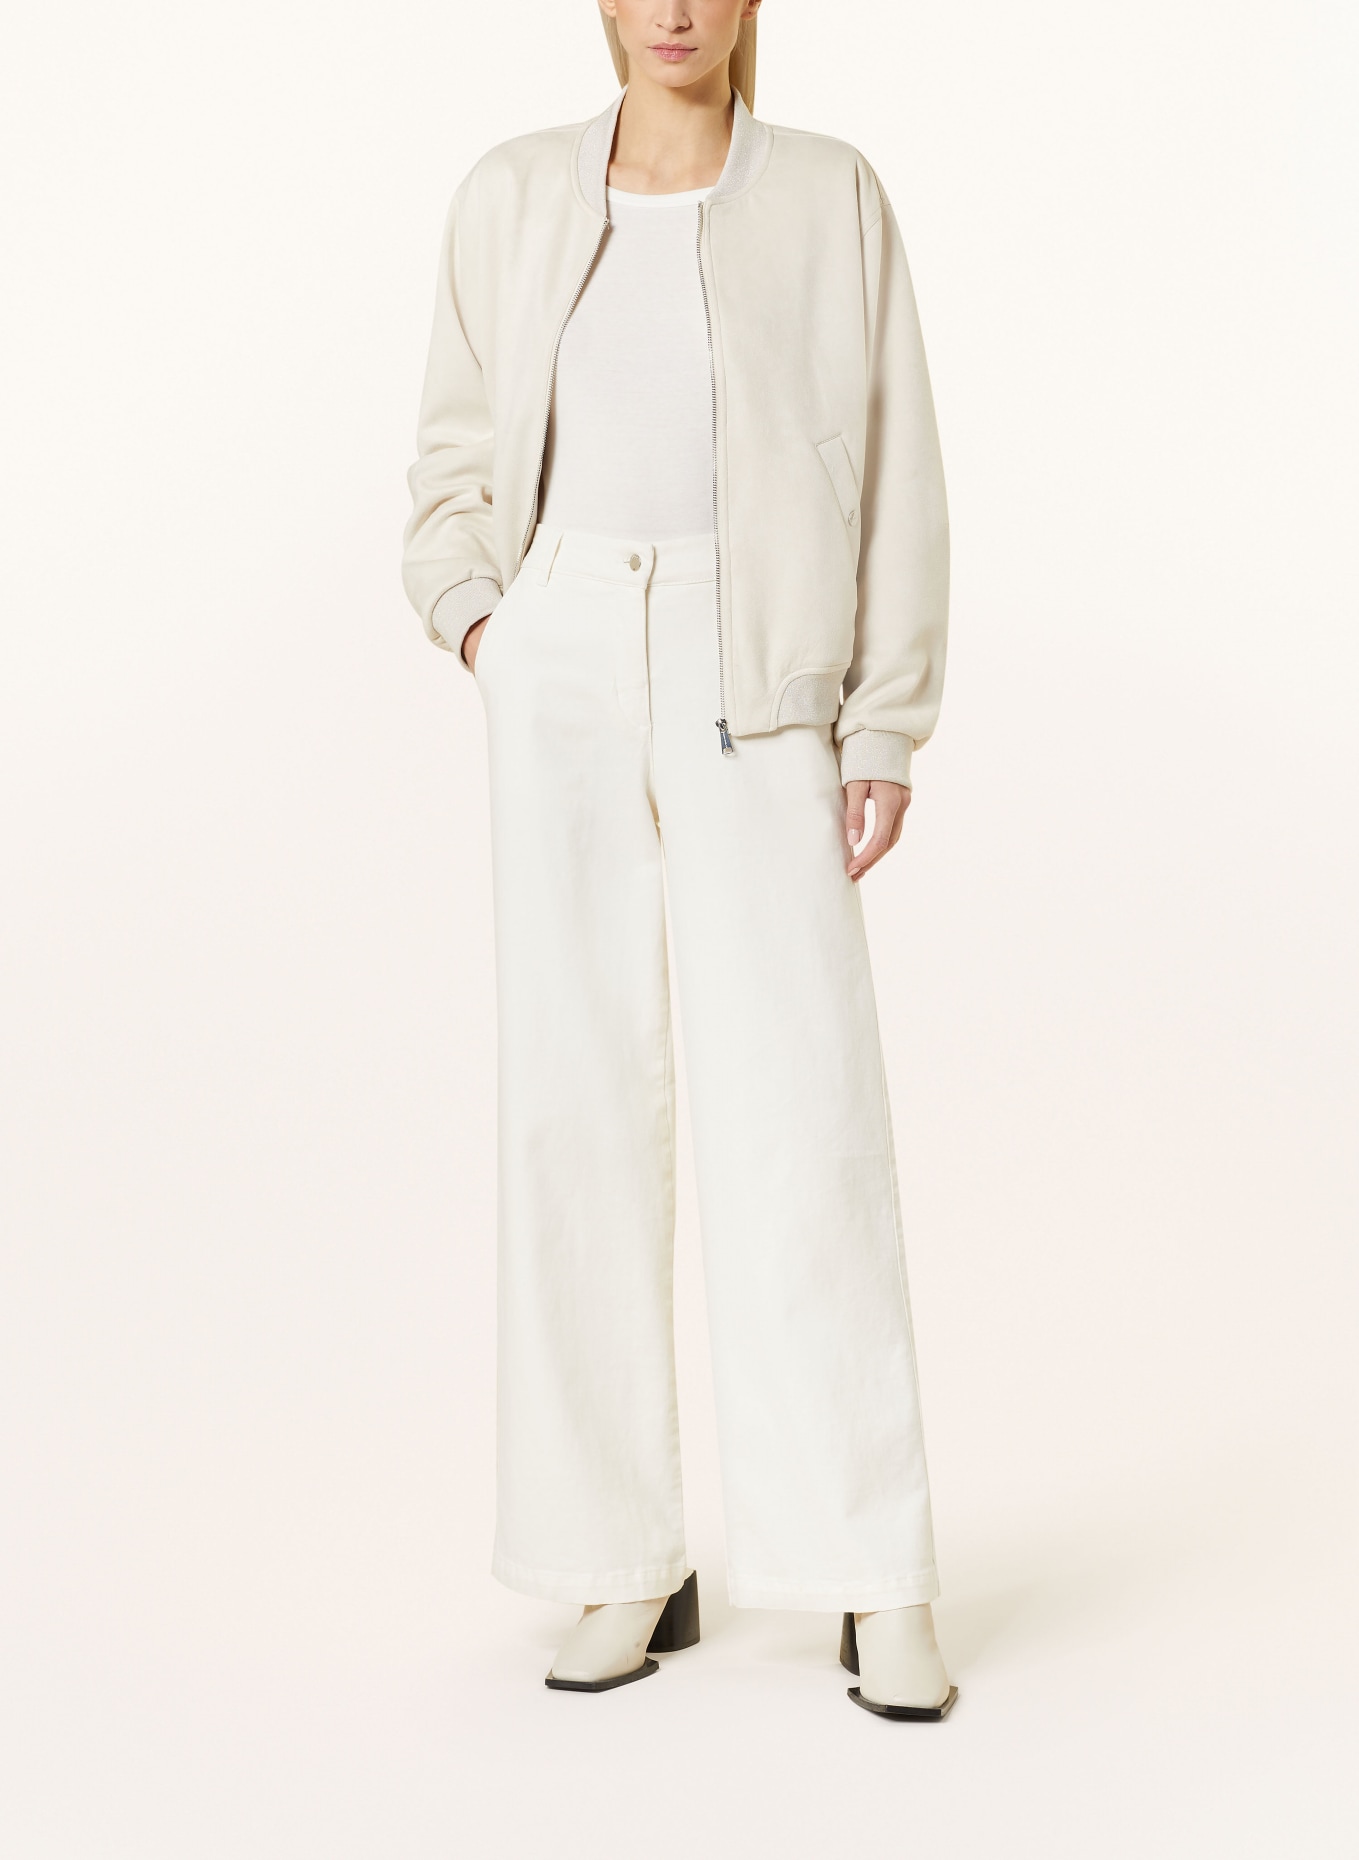 RINO & PELLE Bomber jacket EVELIN in leather look, Color: CREAM (Image 2)